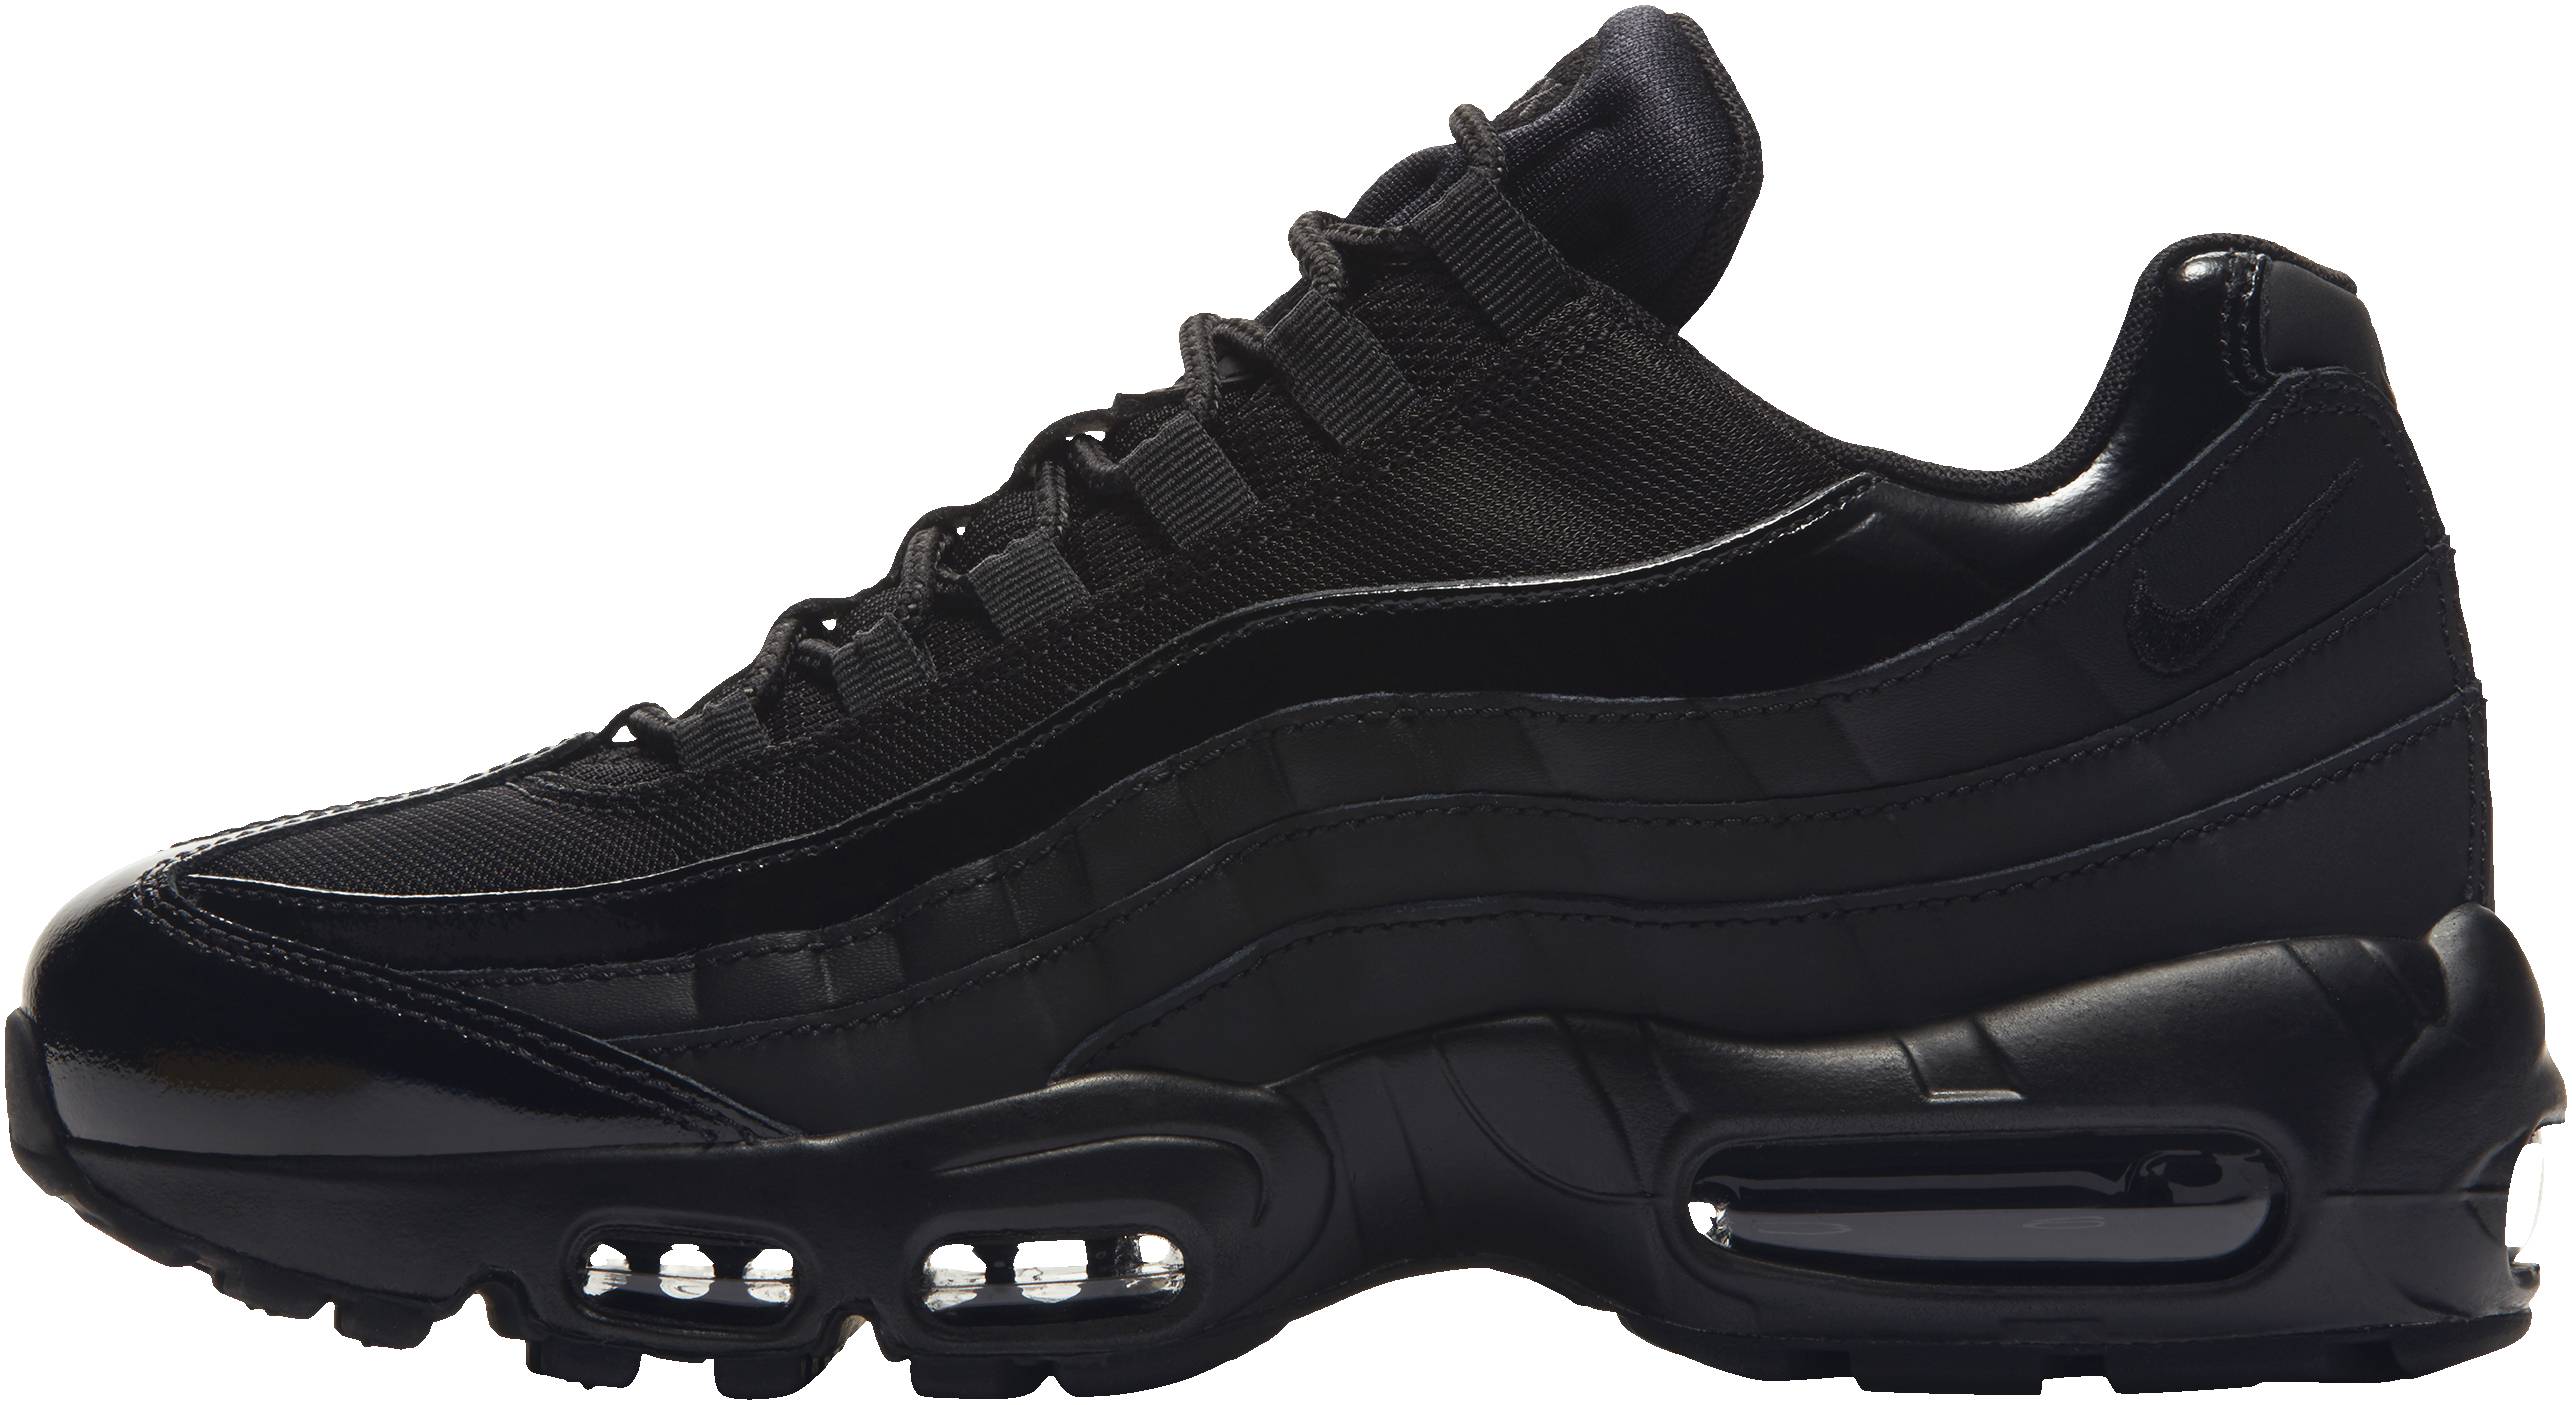 Only $100 + Review of Nike Air Max 95 